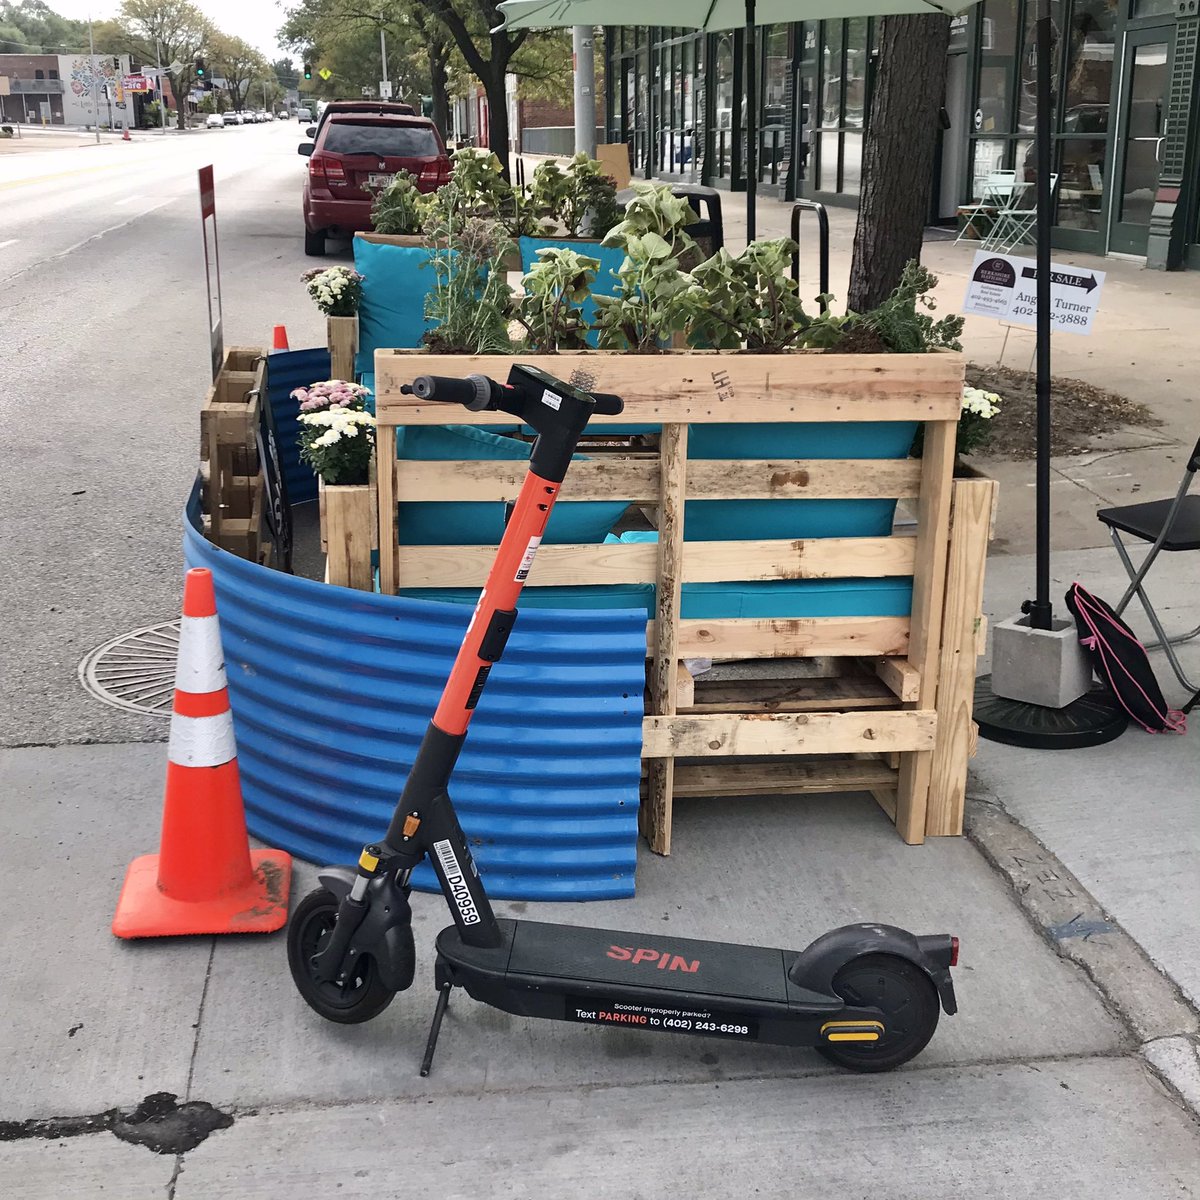 Happy #ParkingDay! This temporary parklet installation will be in front of The Green House at 1234 South 13th Street until 5PM today, Friday, September 17, 2021. Thank you @ModeShiftOmaha @RideSpin @TheBetterBlock. #WeDontCoast